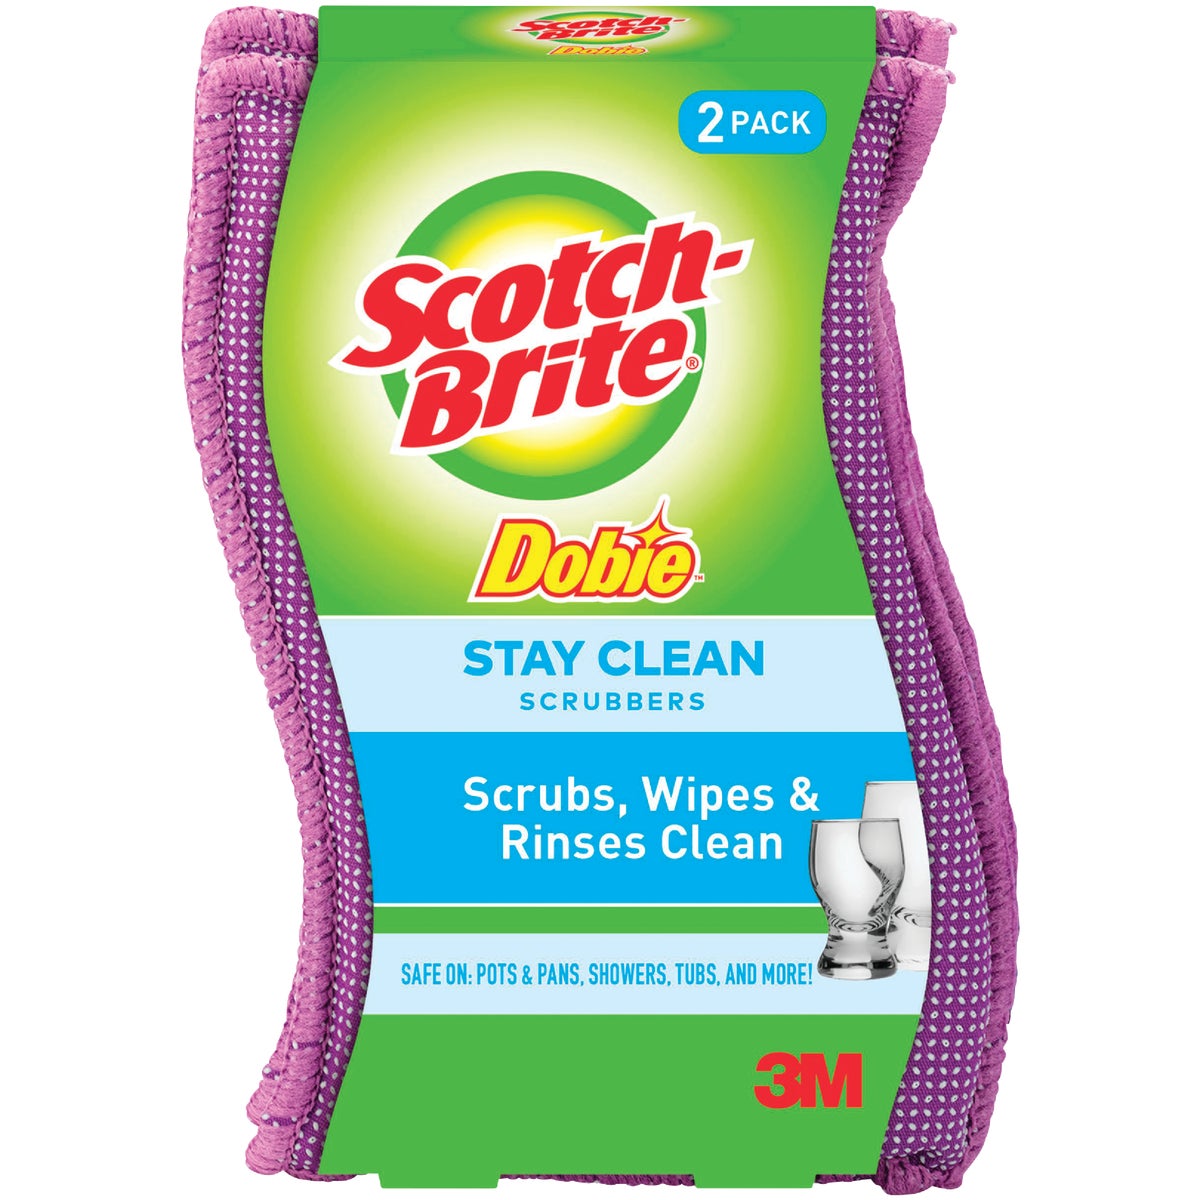 Item 603360, As cleaning tool experts for over 50 years, Scotch Brite Brand is the only 